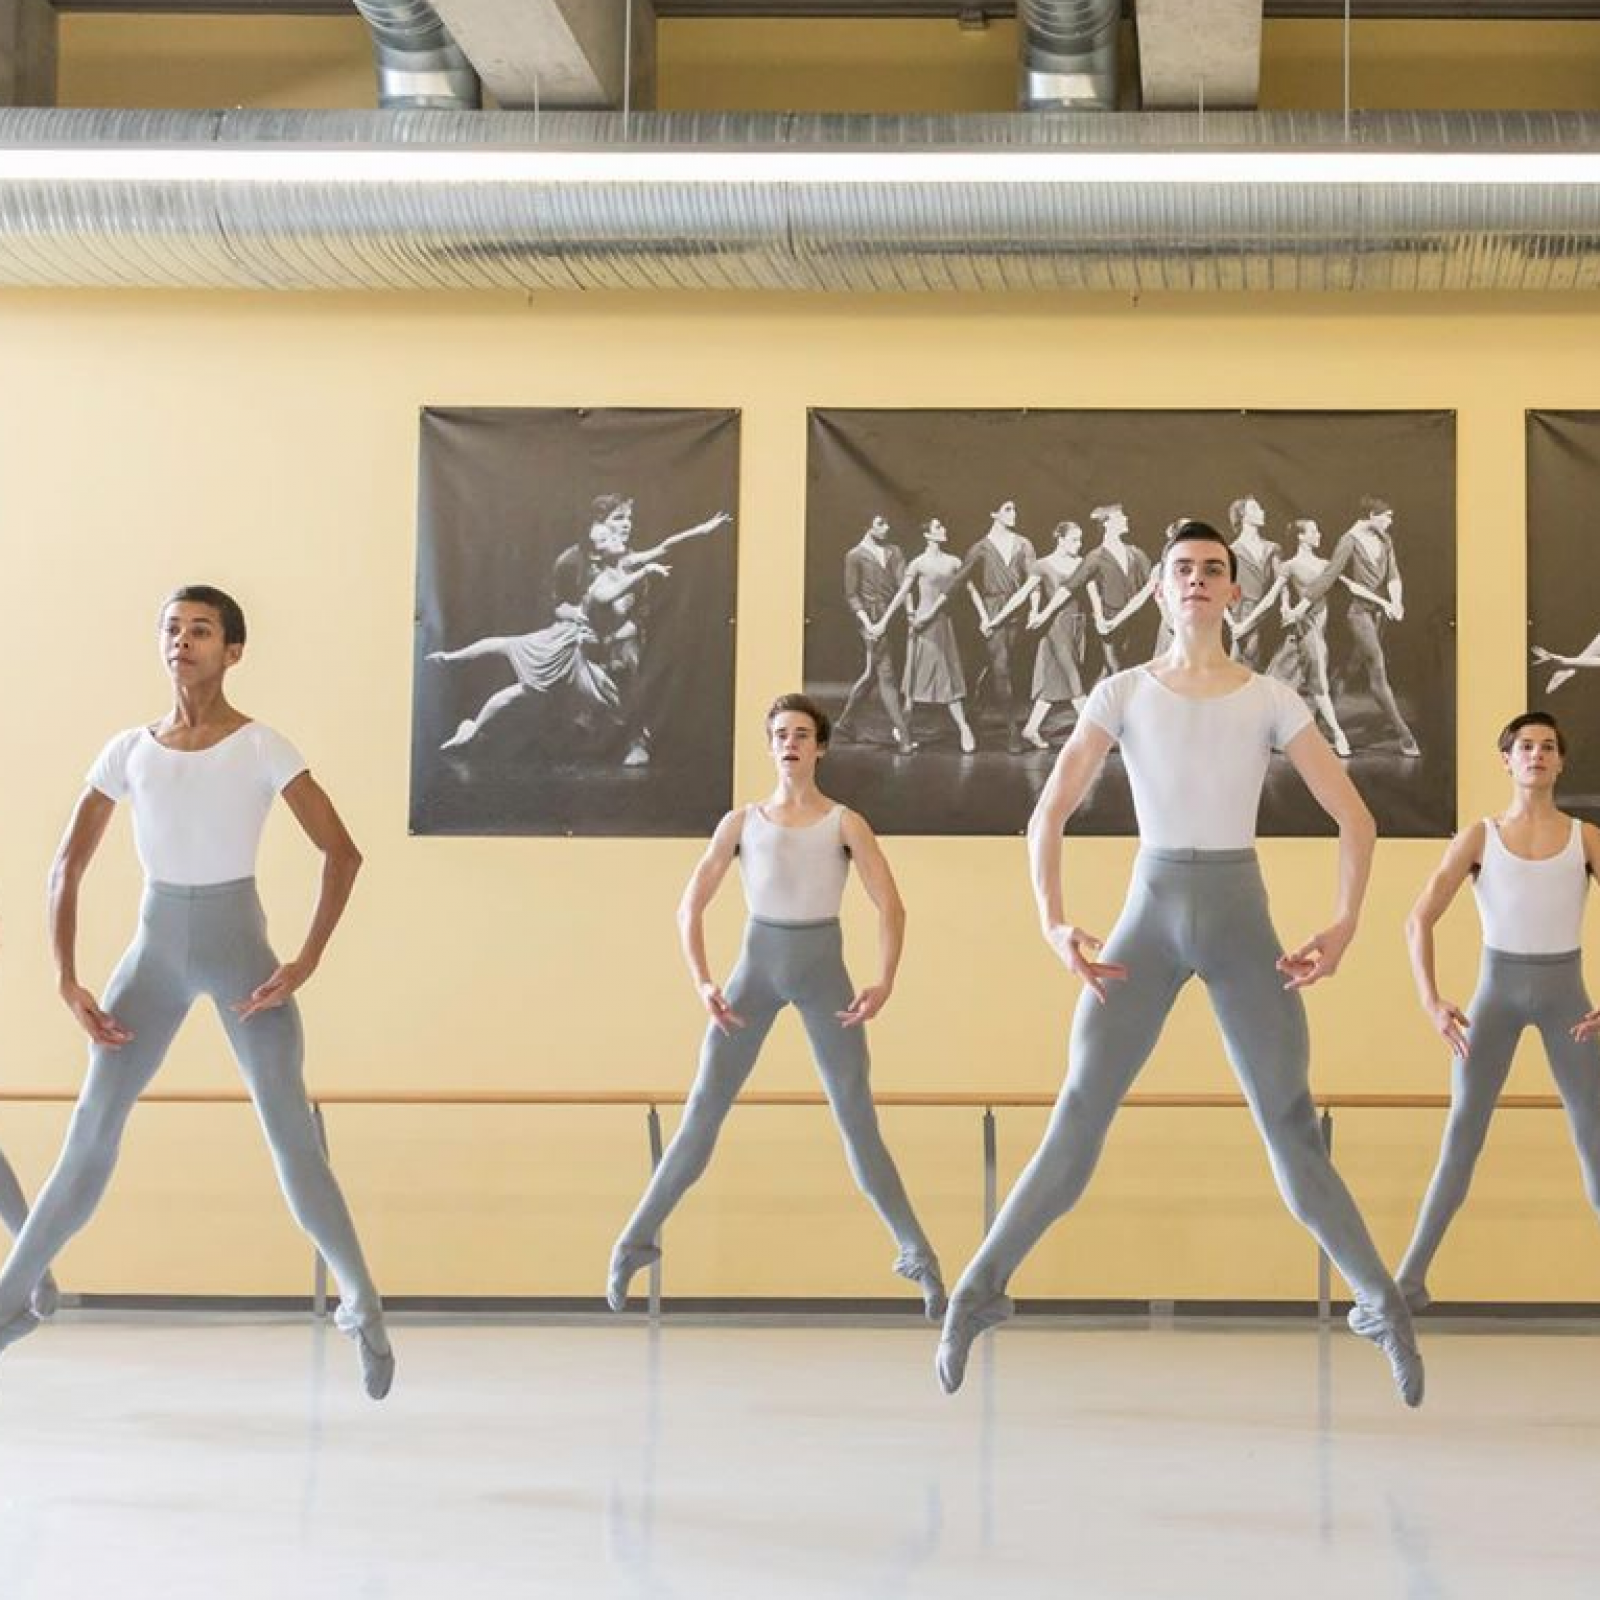 For The First Time, More Boys Than Girls Are From Canada's Premier Ballet School